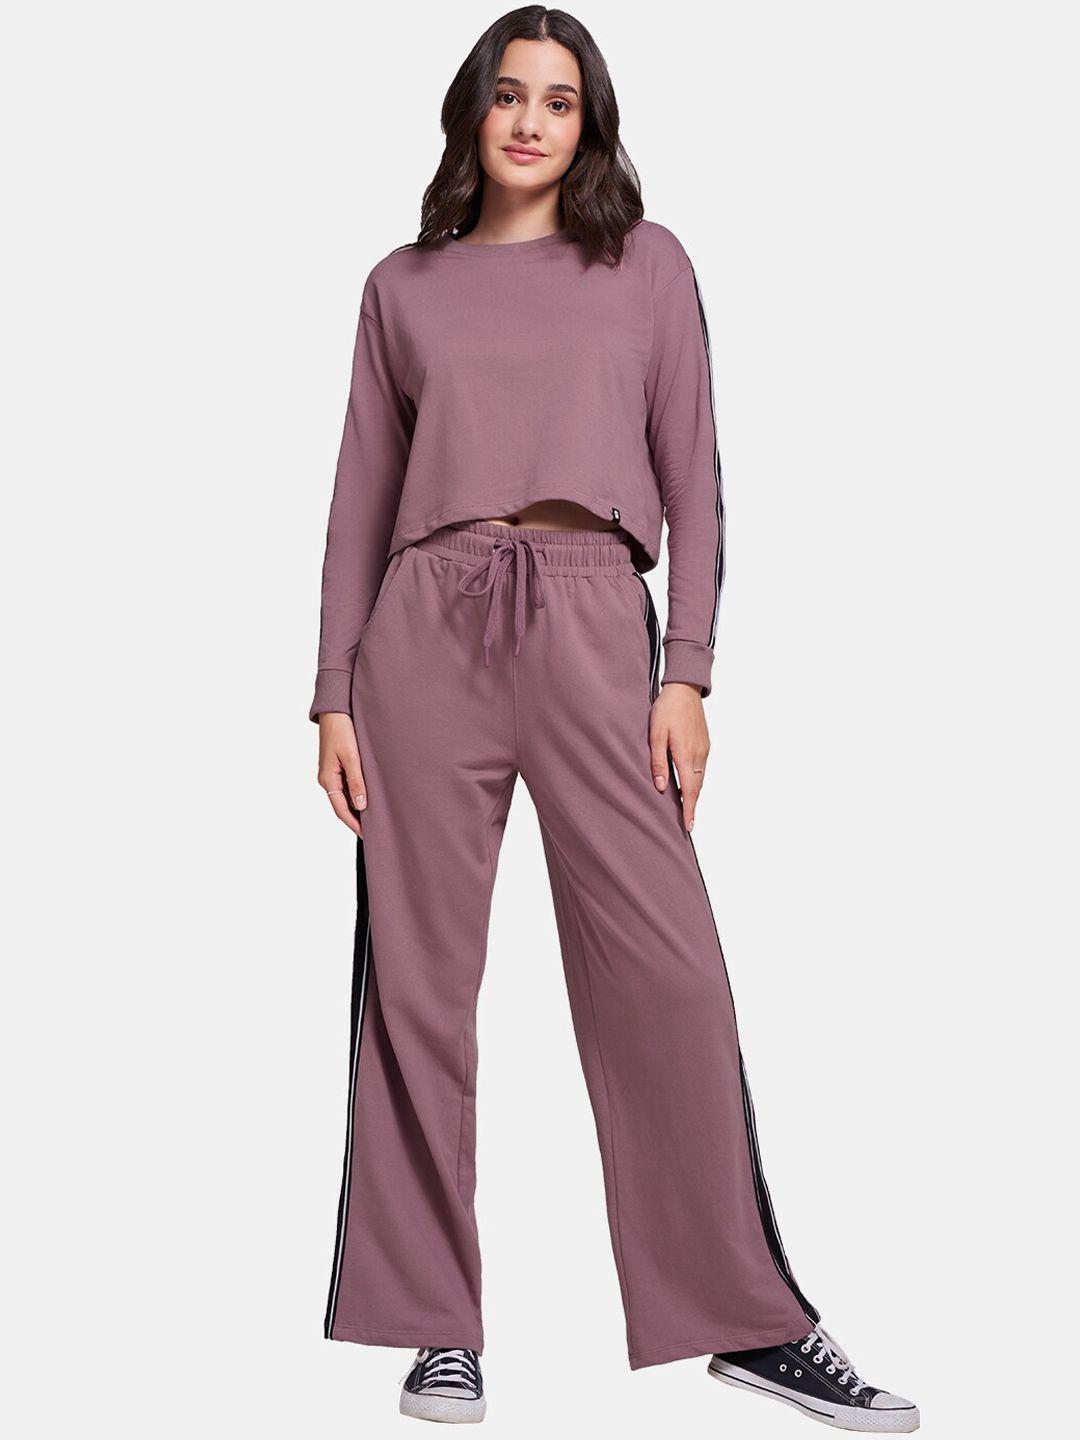 the souled store women mauve solid co-ords